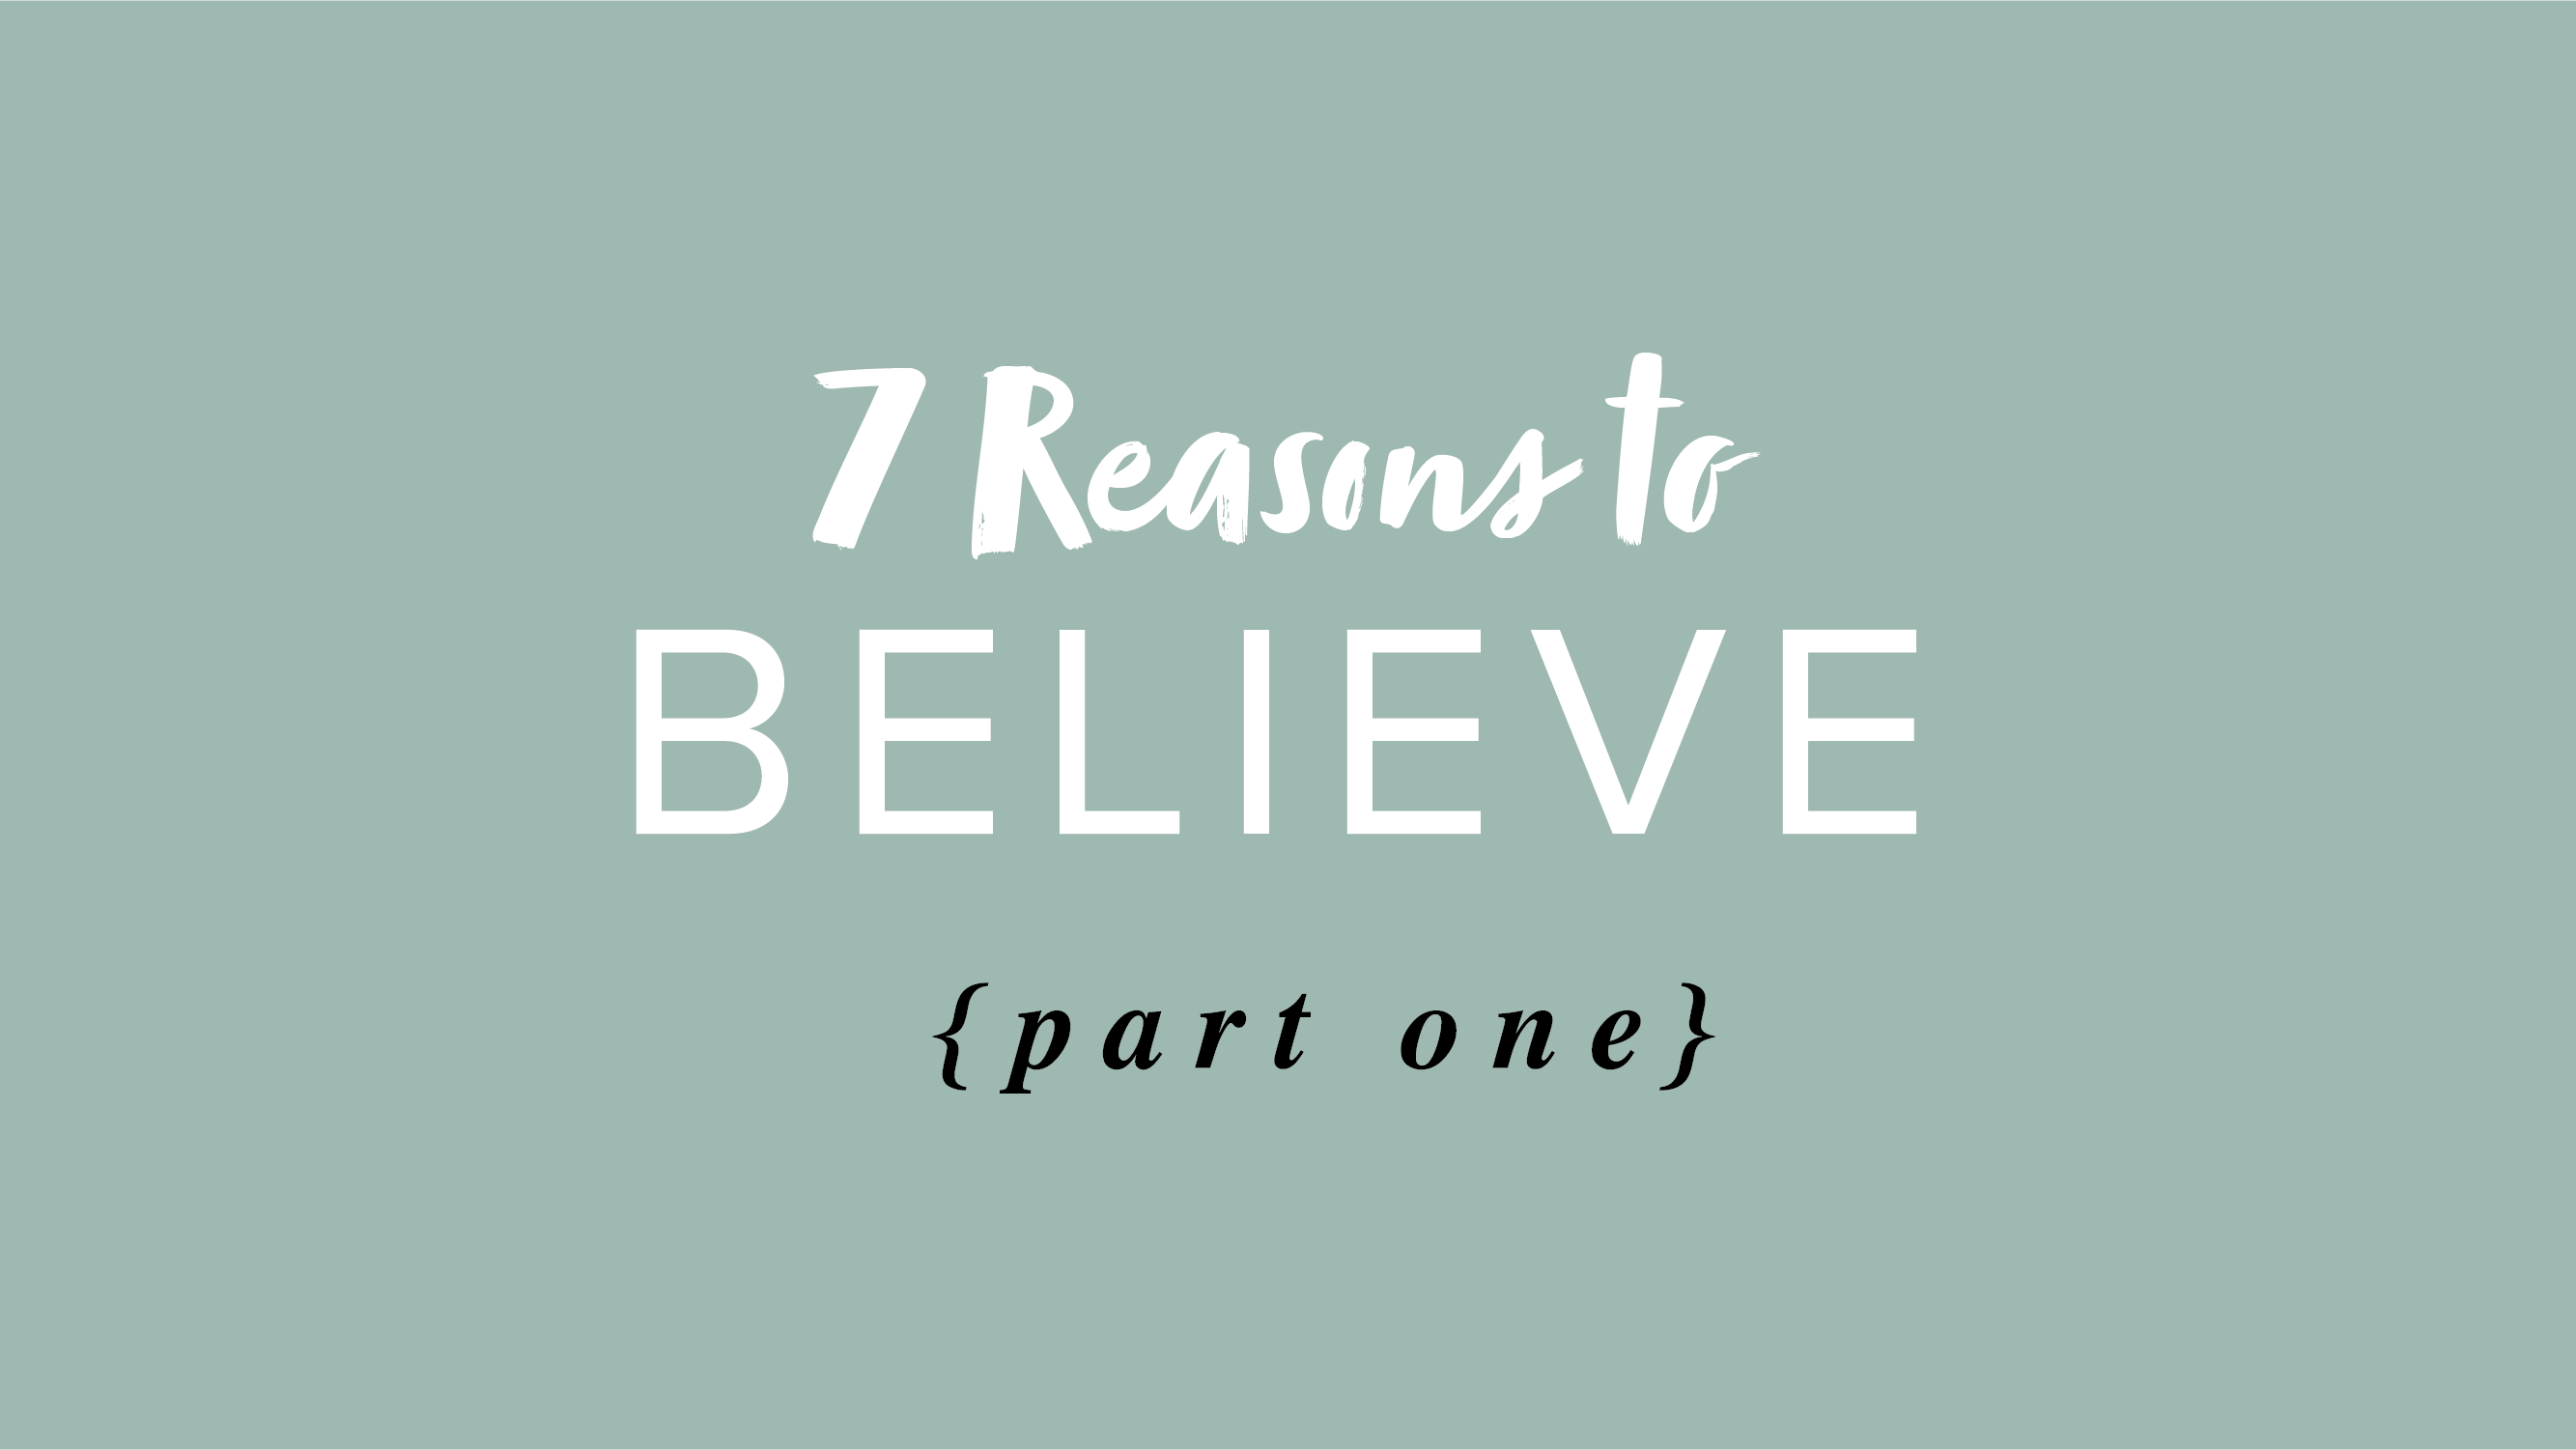 7 Reasons to Believe – Part 1